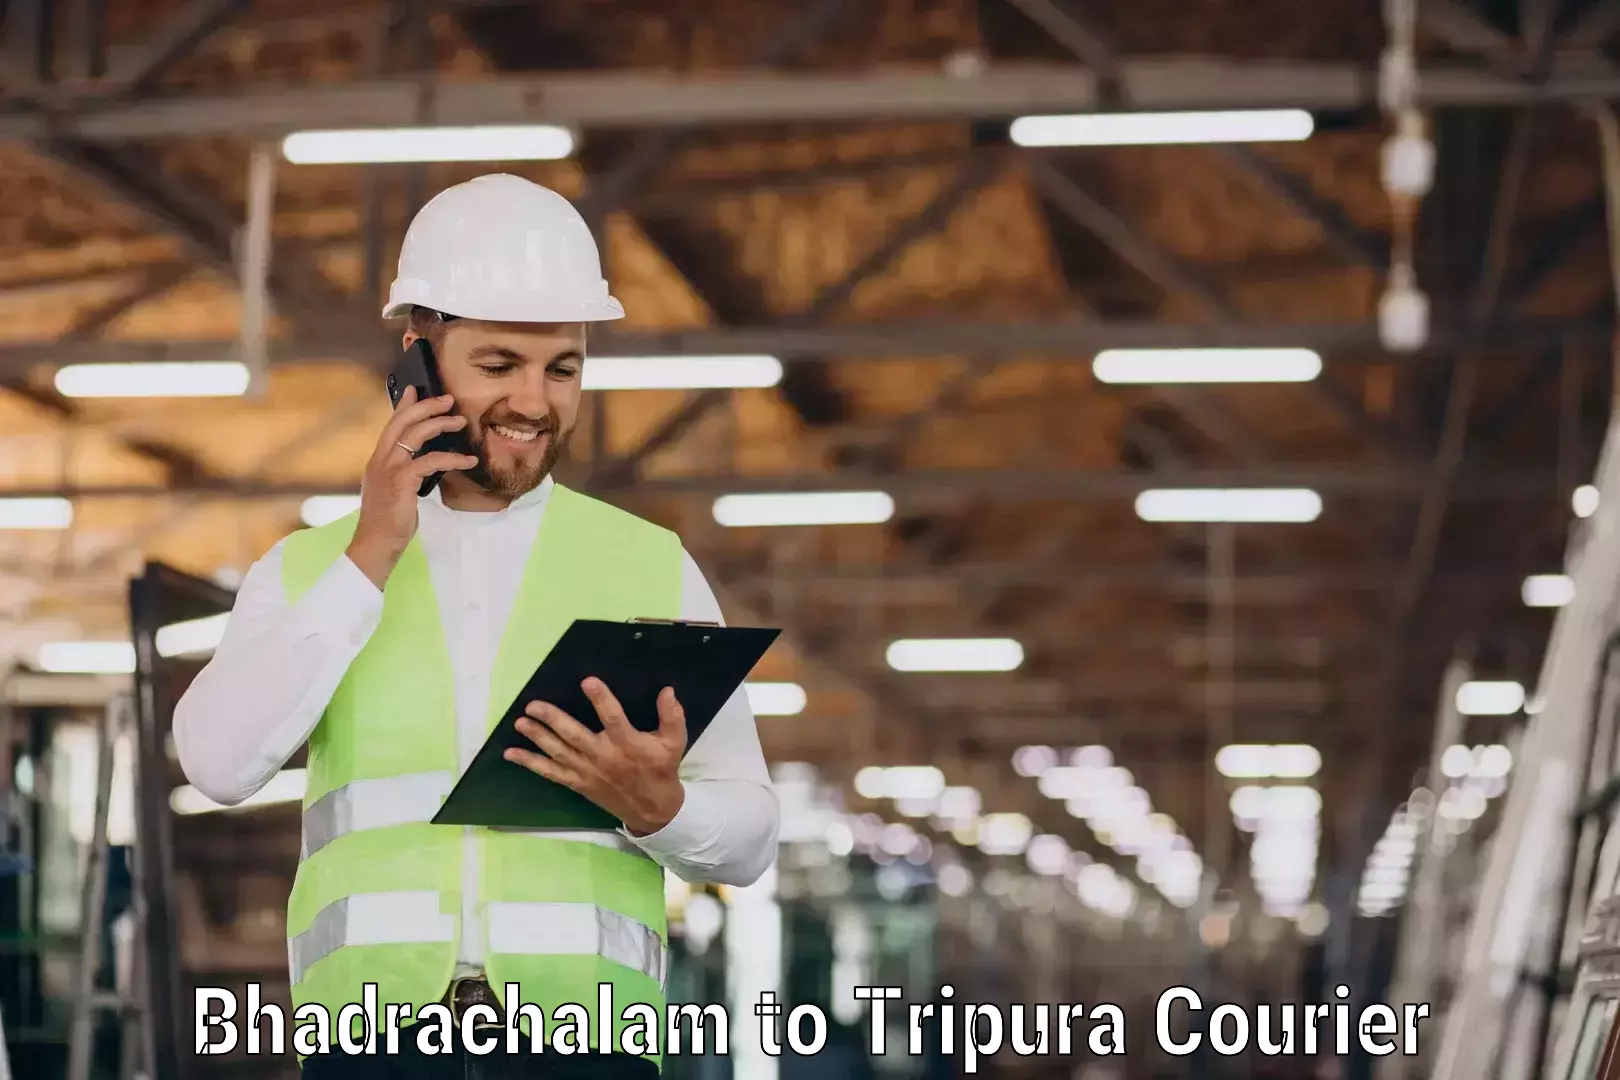 Efficient package consolidation Bhadrachalam to Udaipur Tripura